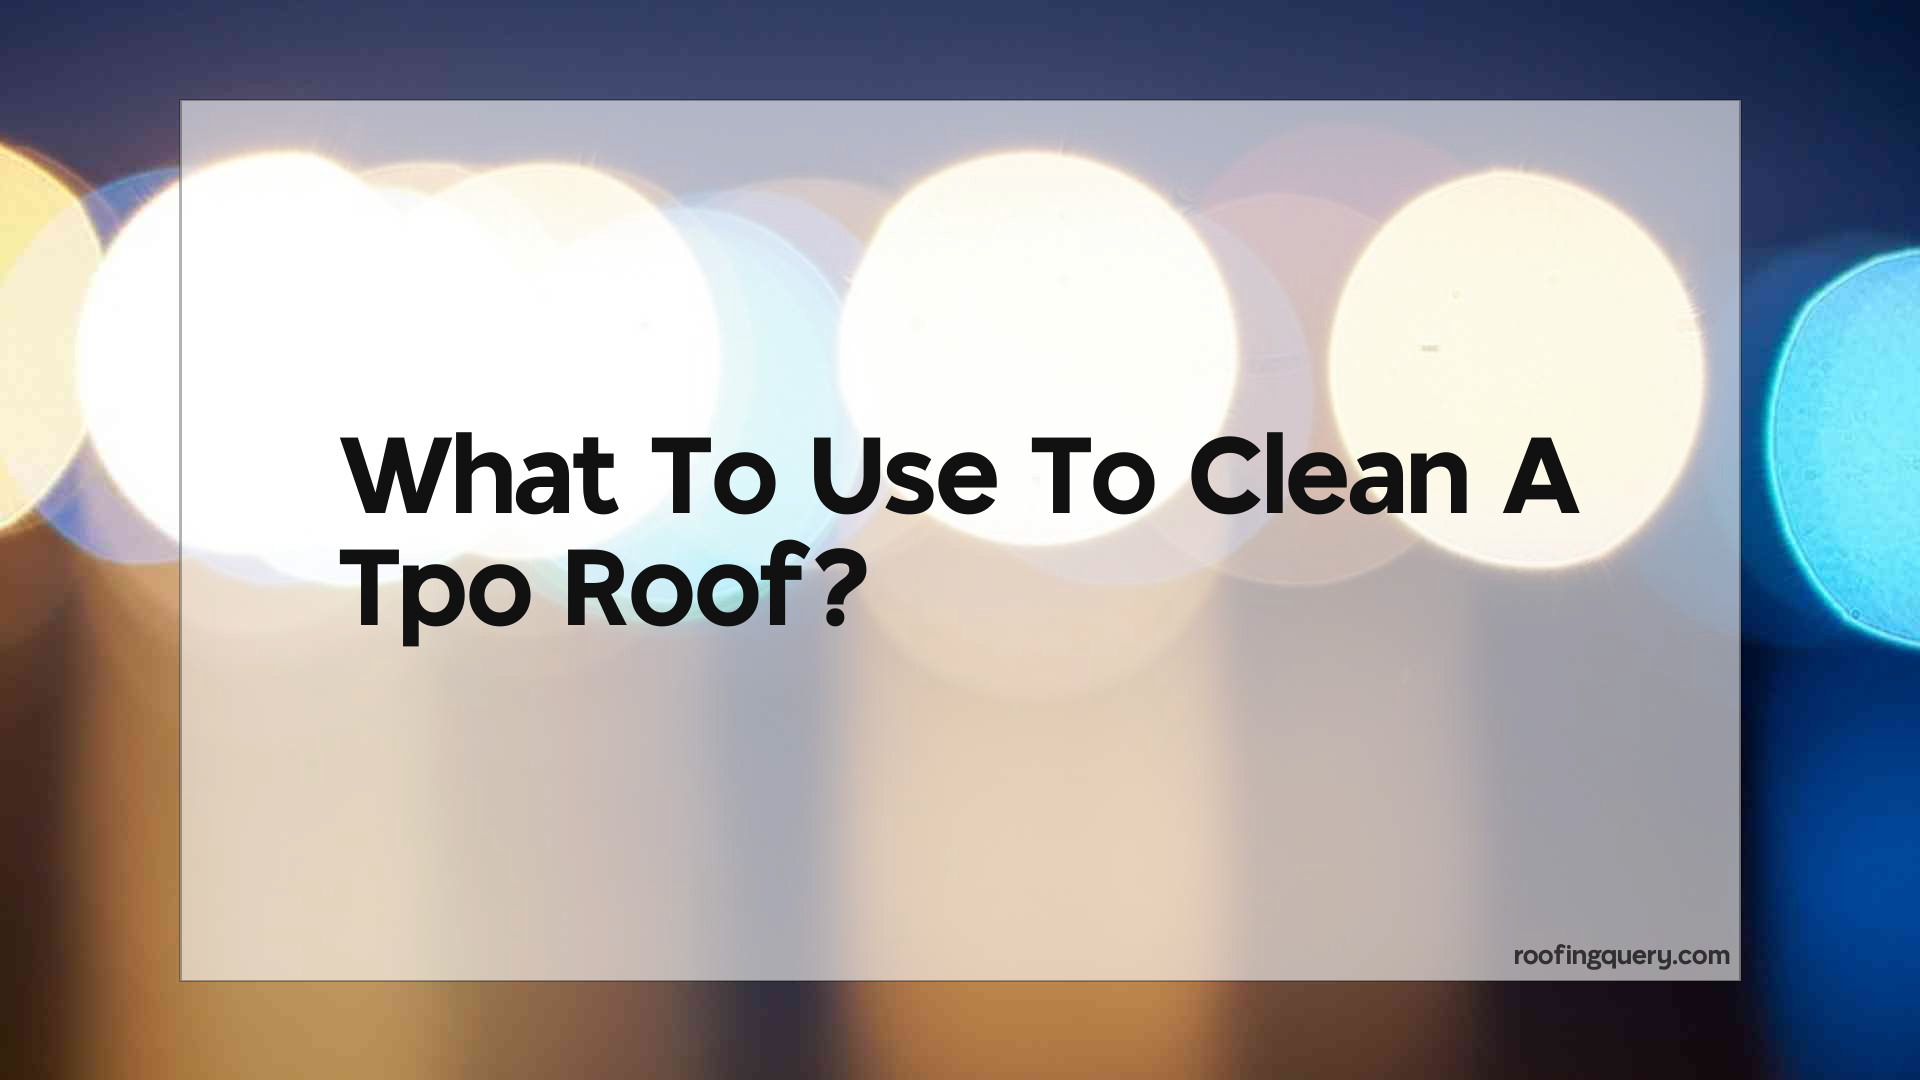 What To Use To Clean A Tpo Roof